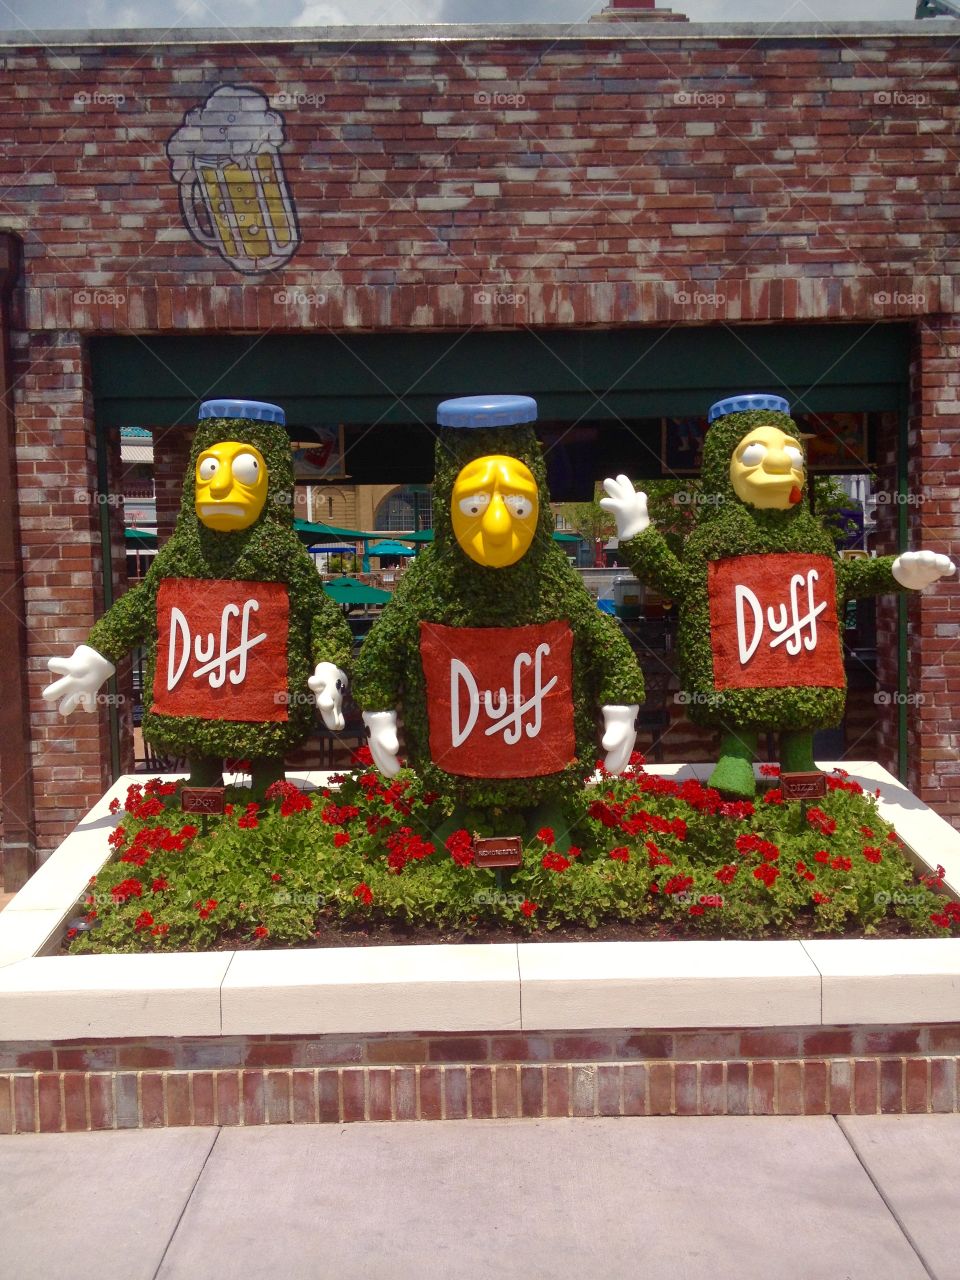 Can't get enough of that wonderful duff...